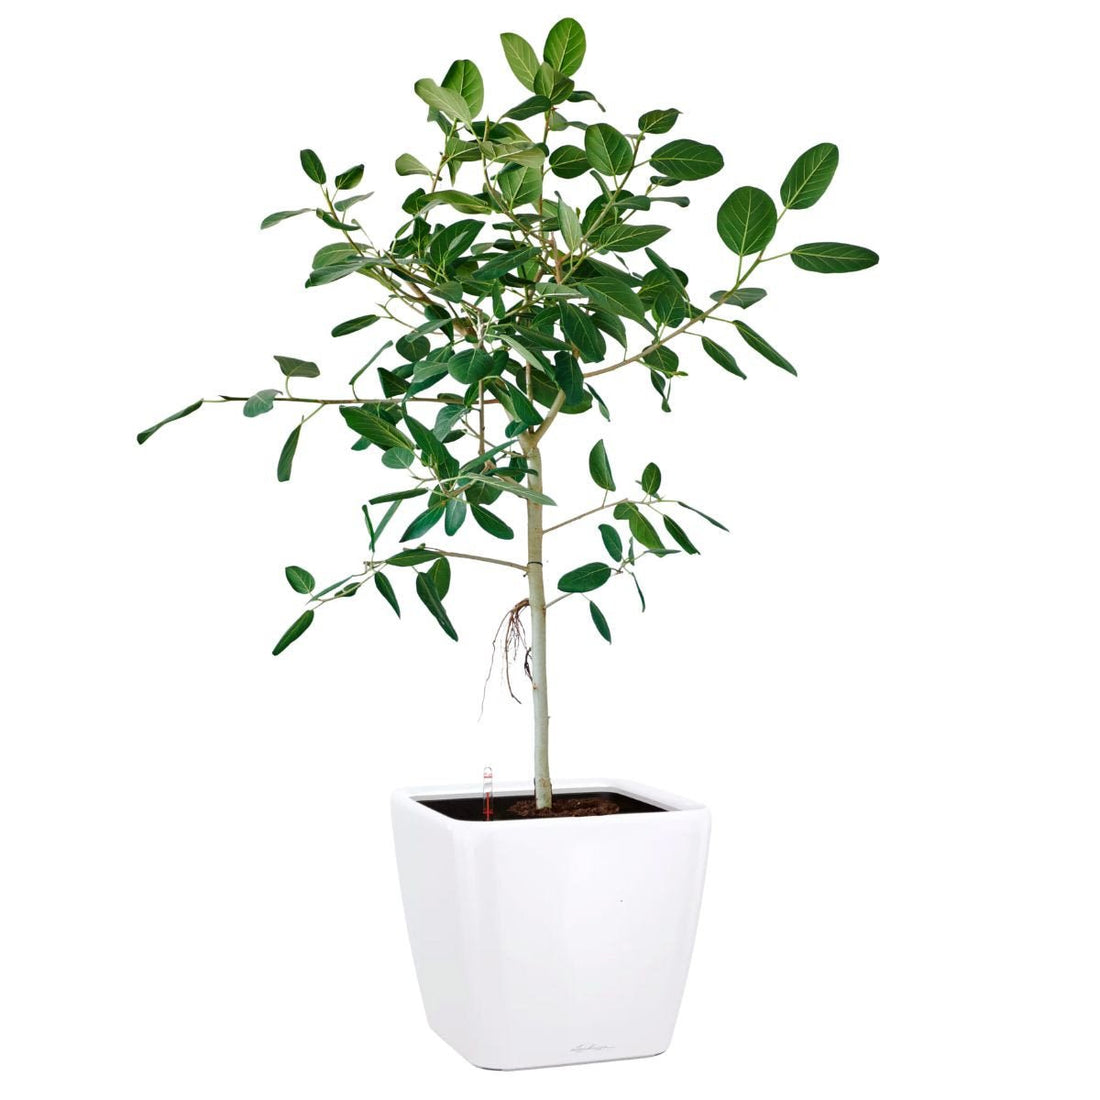 Ficus Audrey Potted In Lechuza Quadro 50 Planter - White - My City Plants